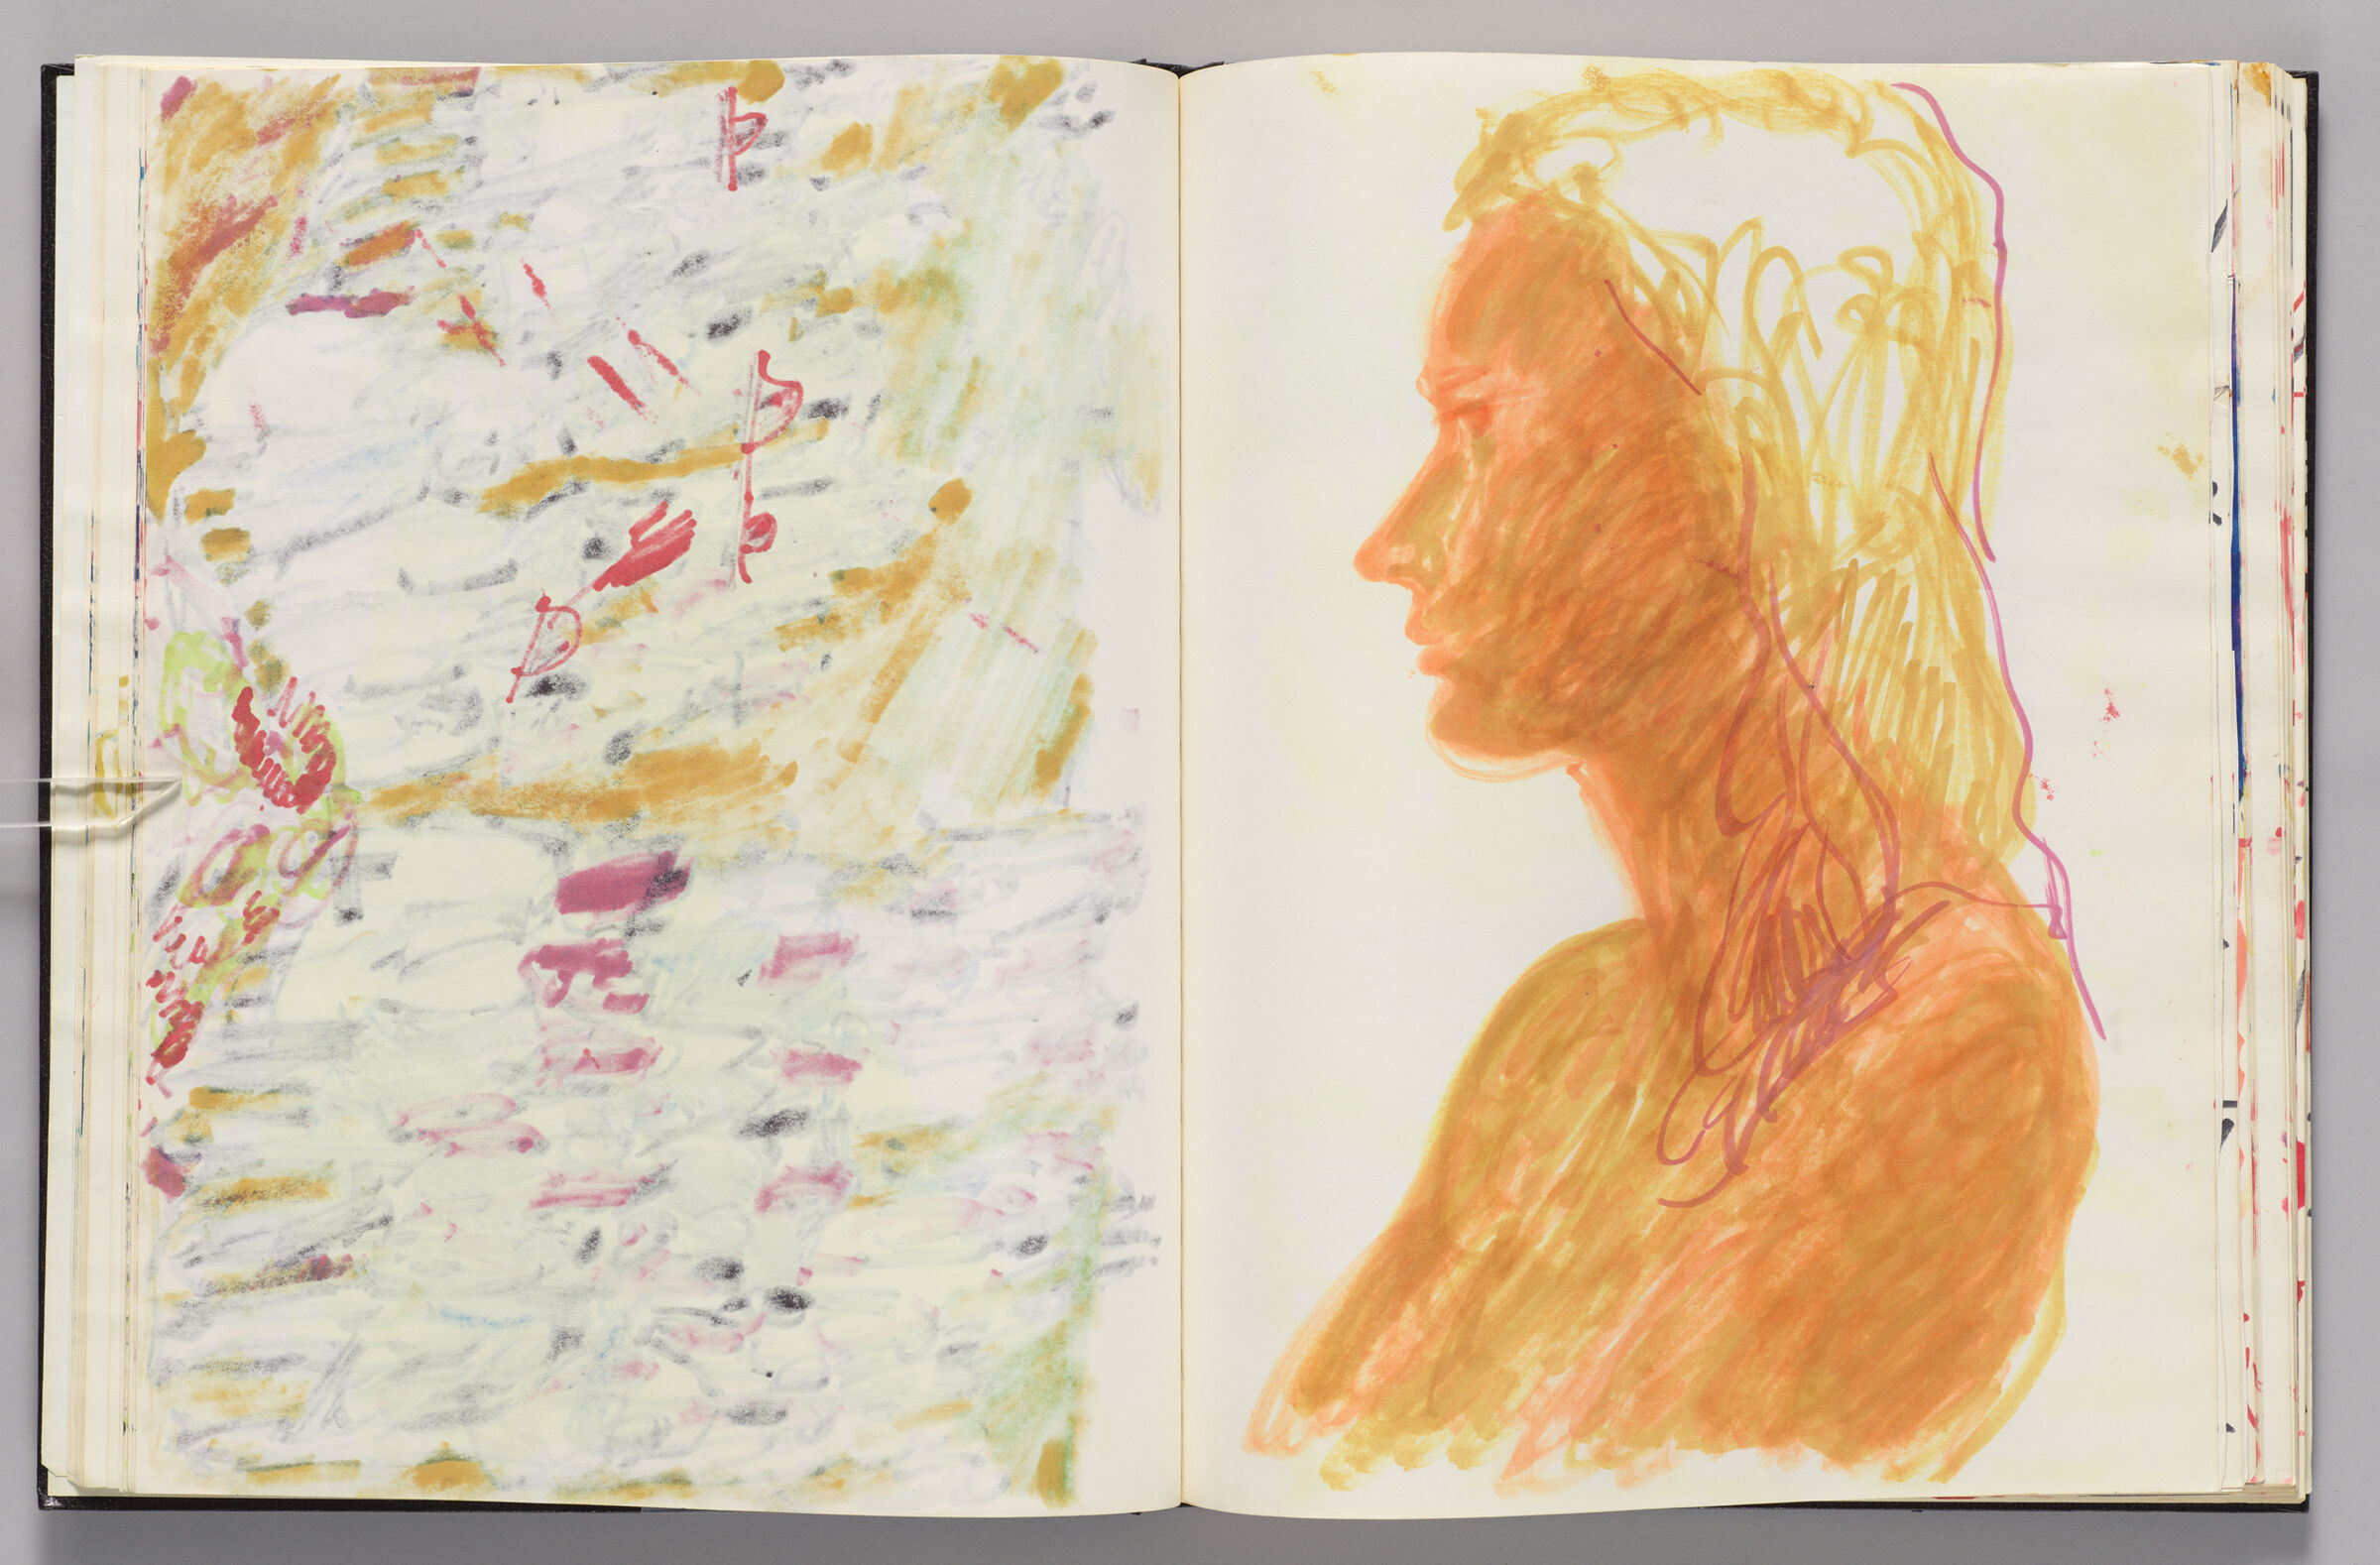 Untitled (Bleed-Through Of Previous Page, Left Page); Untitled (Profile Bust Portait Of Female Figure (Elizabeth Goldring), Right Page)